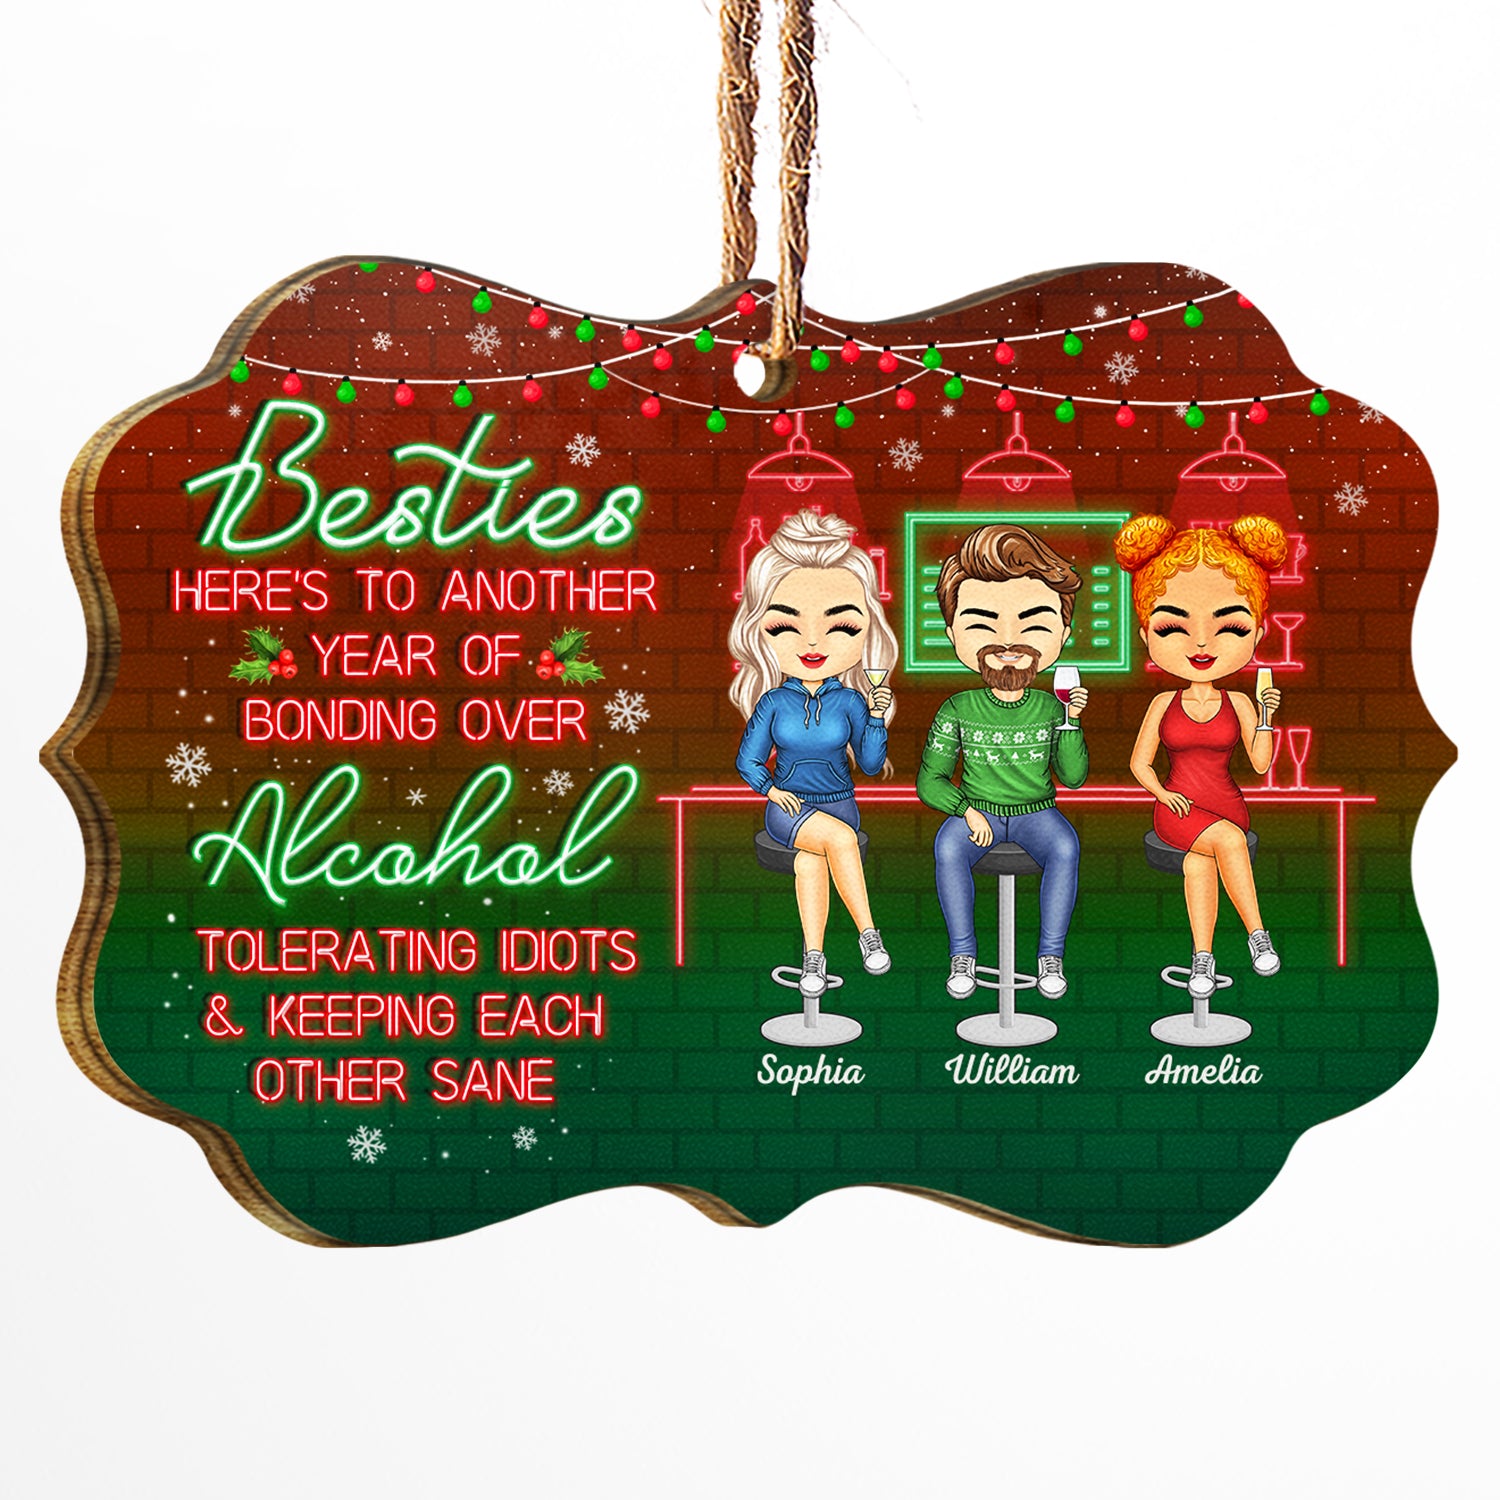 Here's To Another Year Of Bonding Over Alcohol Tolerating Idiots Christmas Best Friends - Bestie BFF Gift - Personalized Wooden Ornament